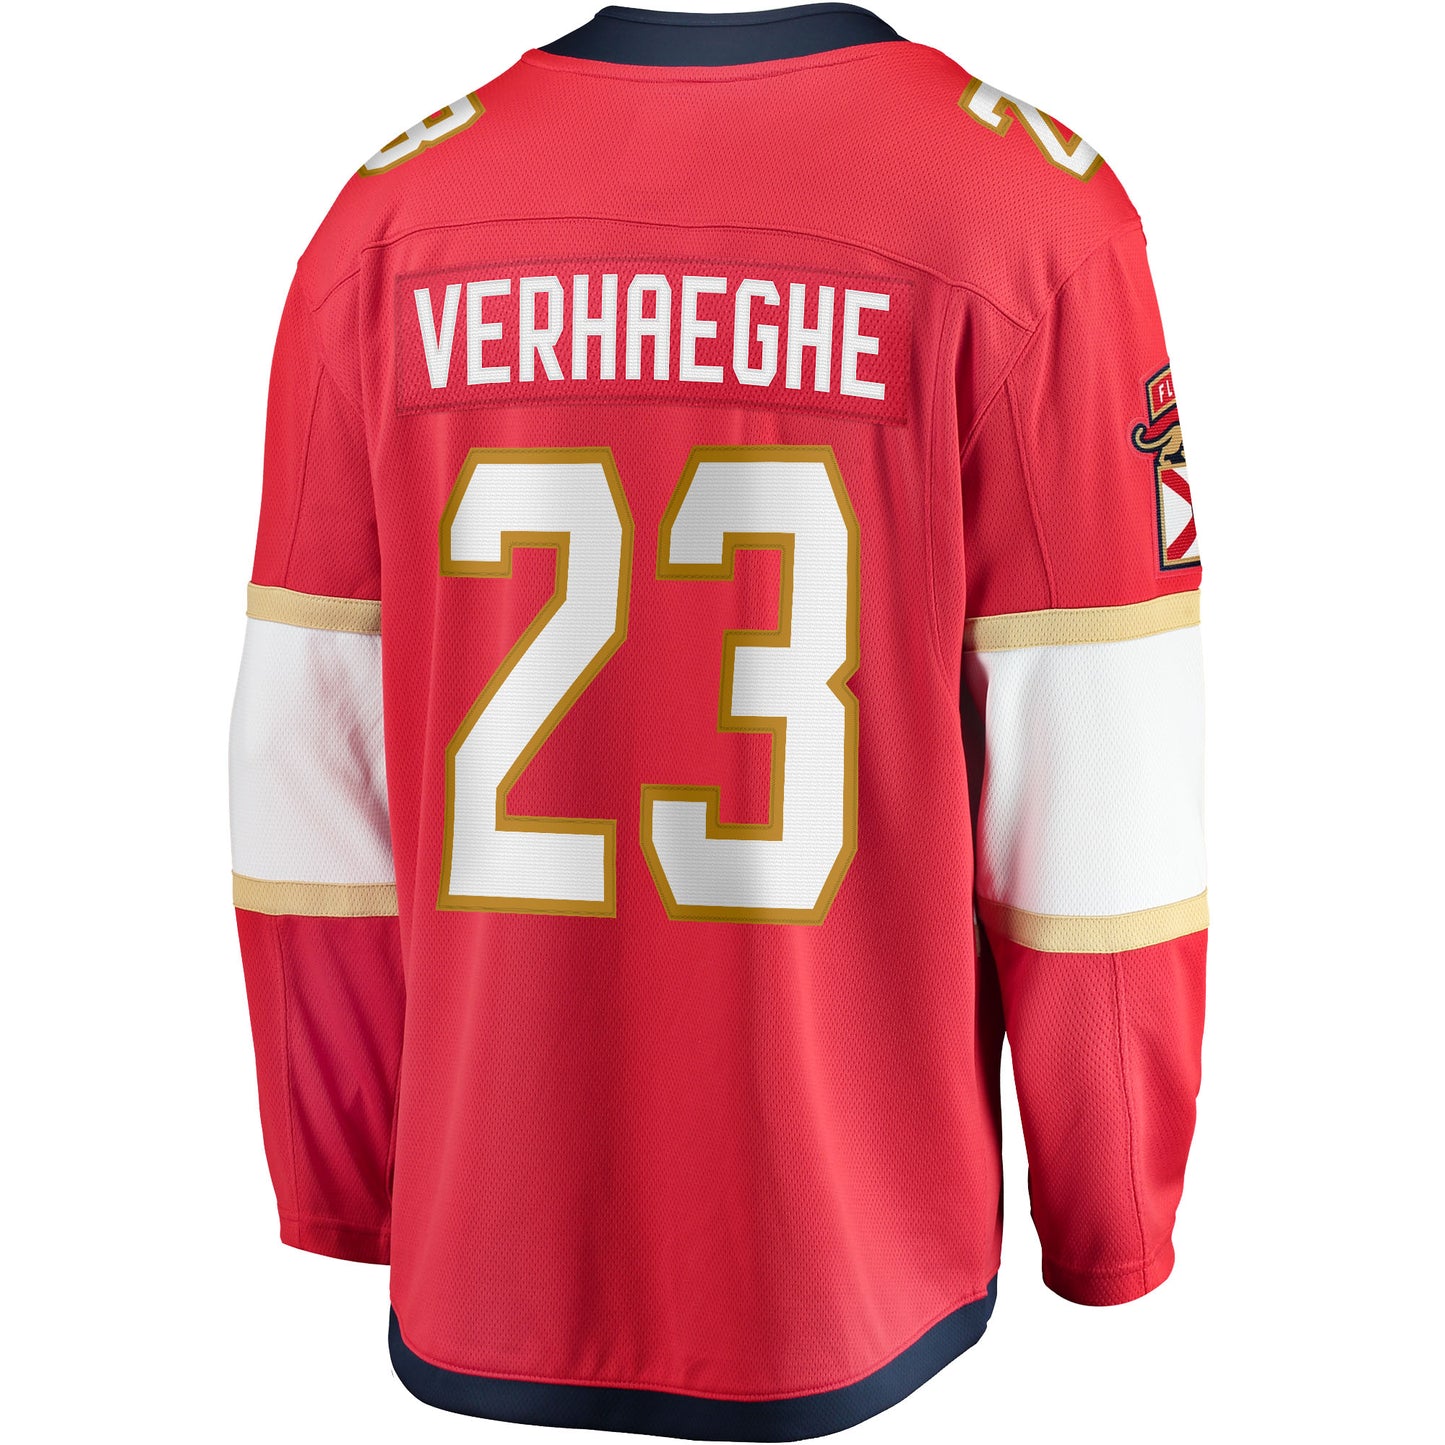 Carter Verhaeghe Florida Panthers Fanatics Branded Home Breakaway Jersey - Red